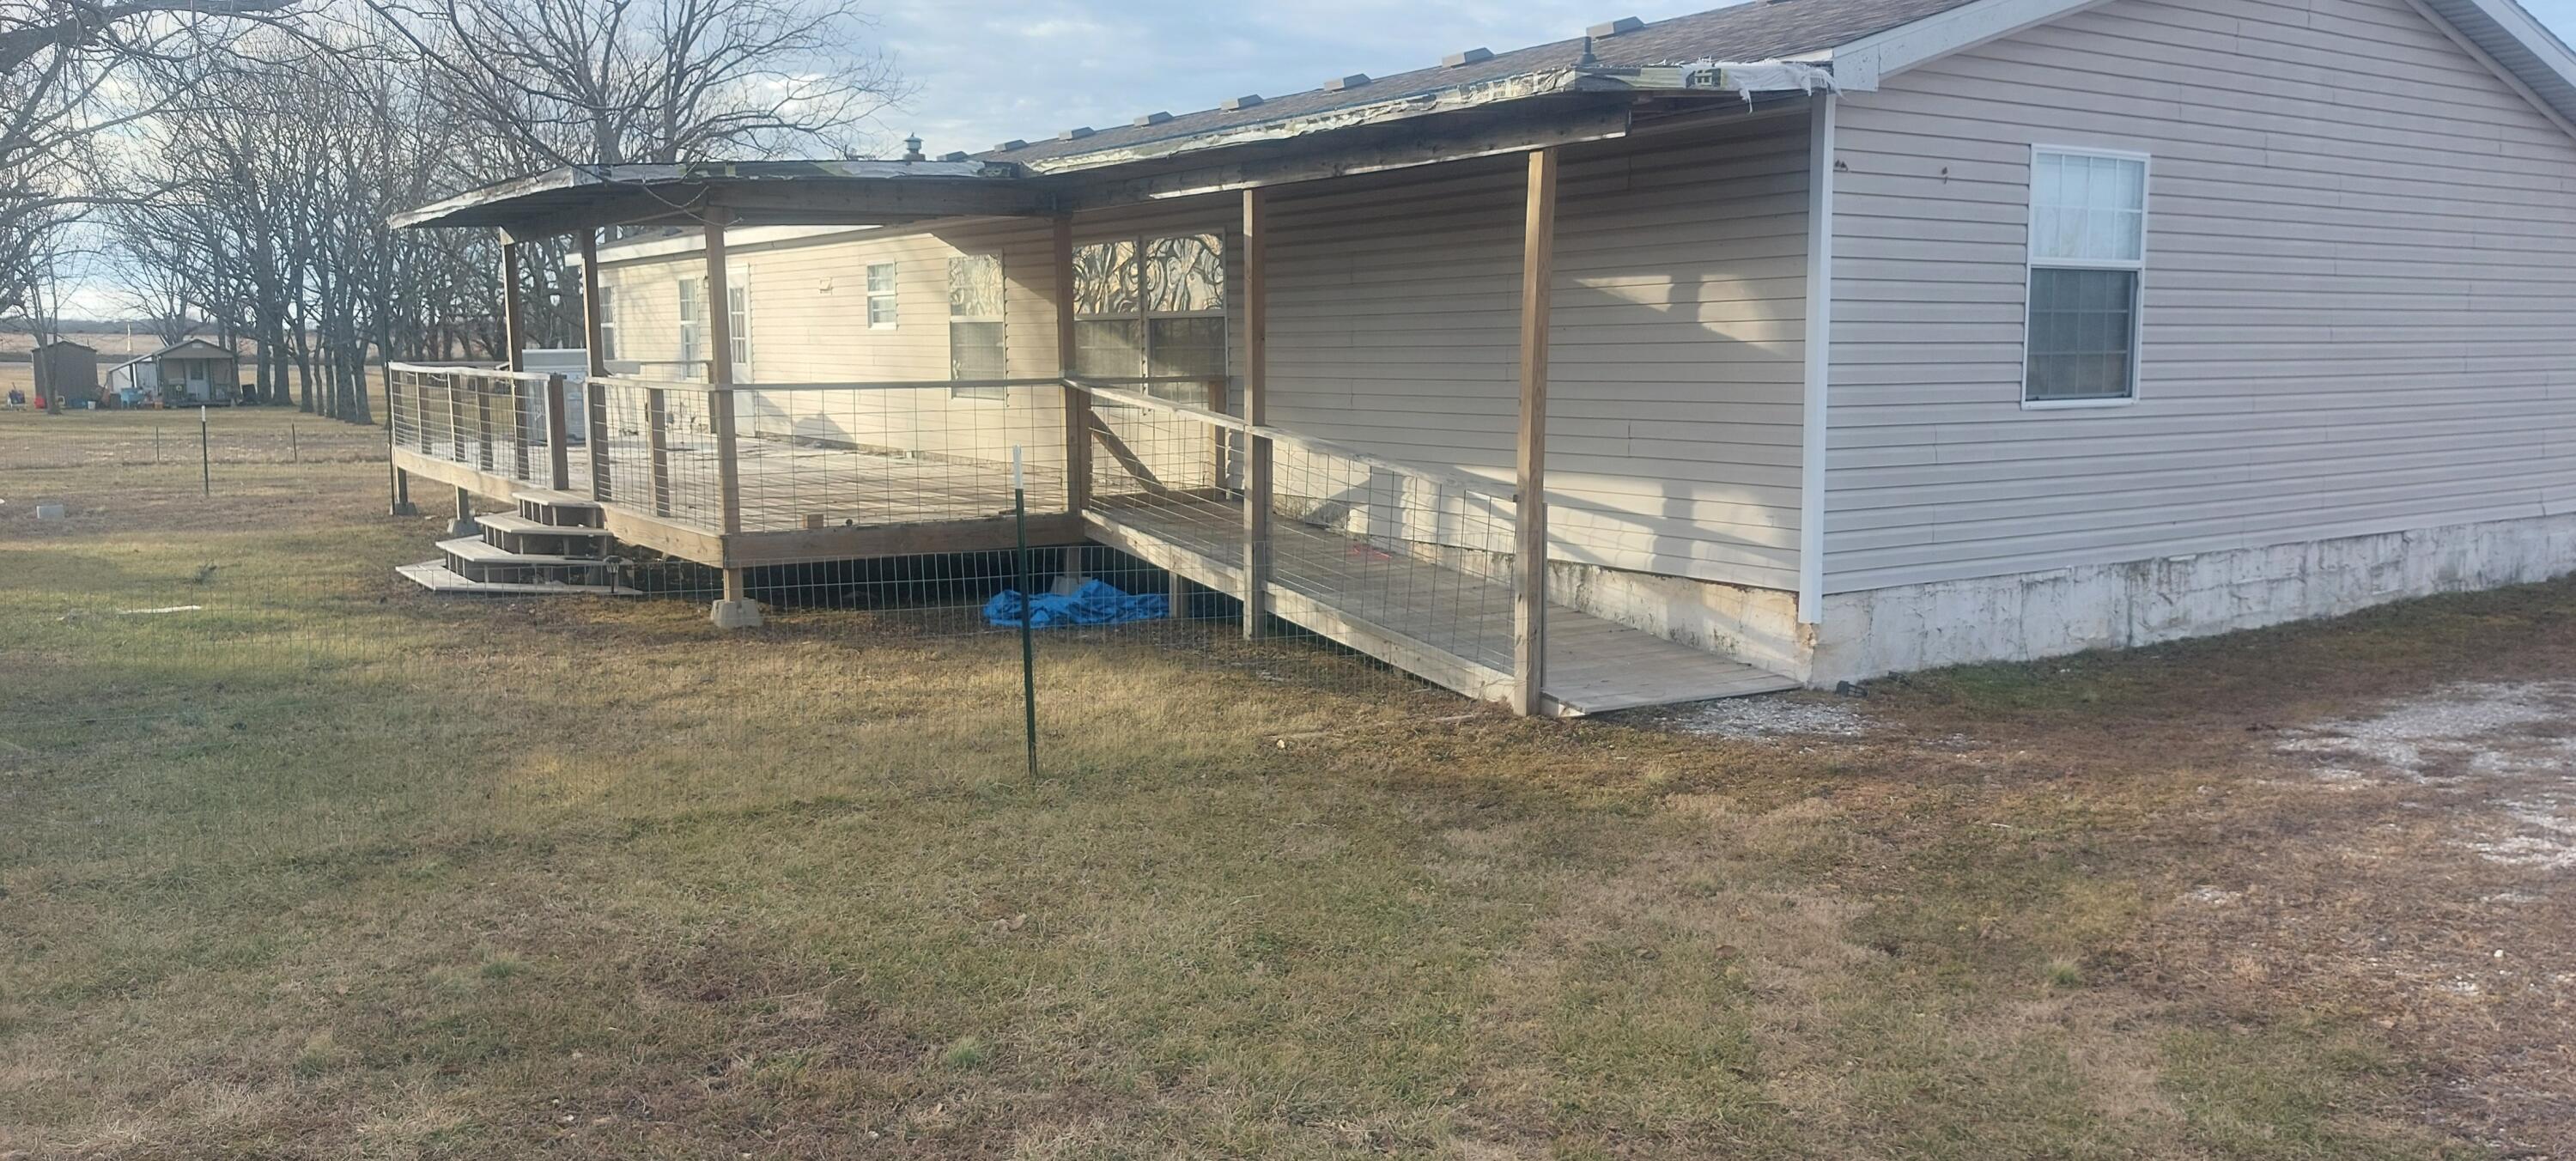 Photo 2 of 8 of 11045 Lawrence 1061 mobile home